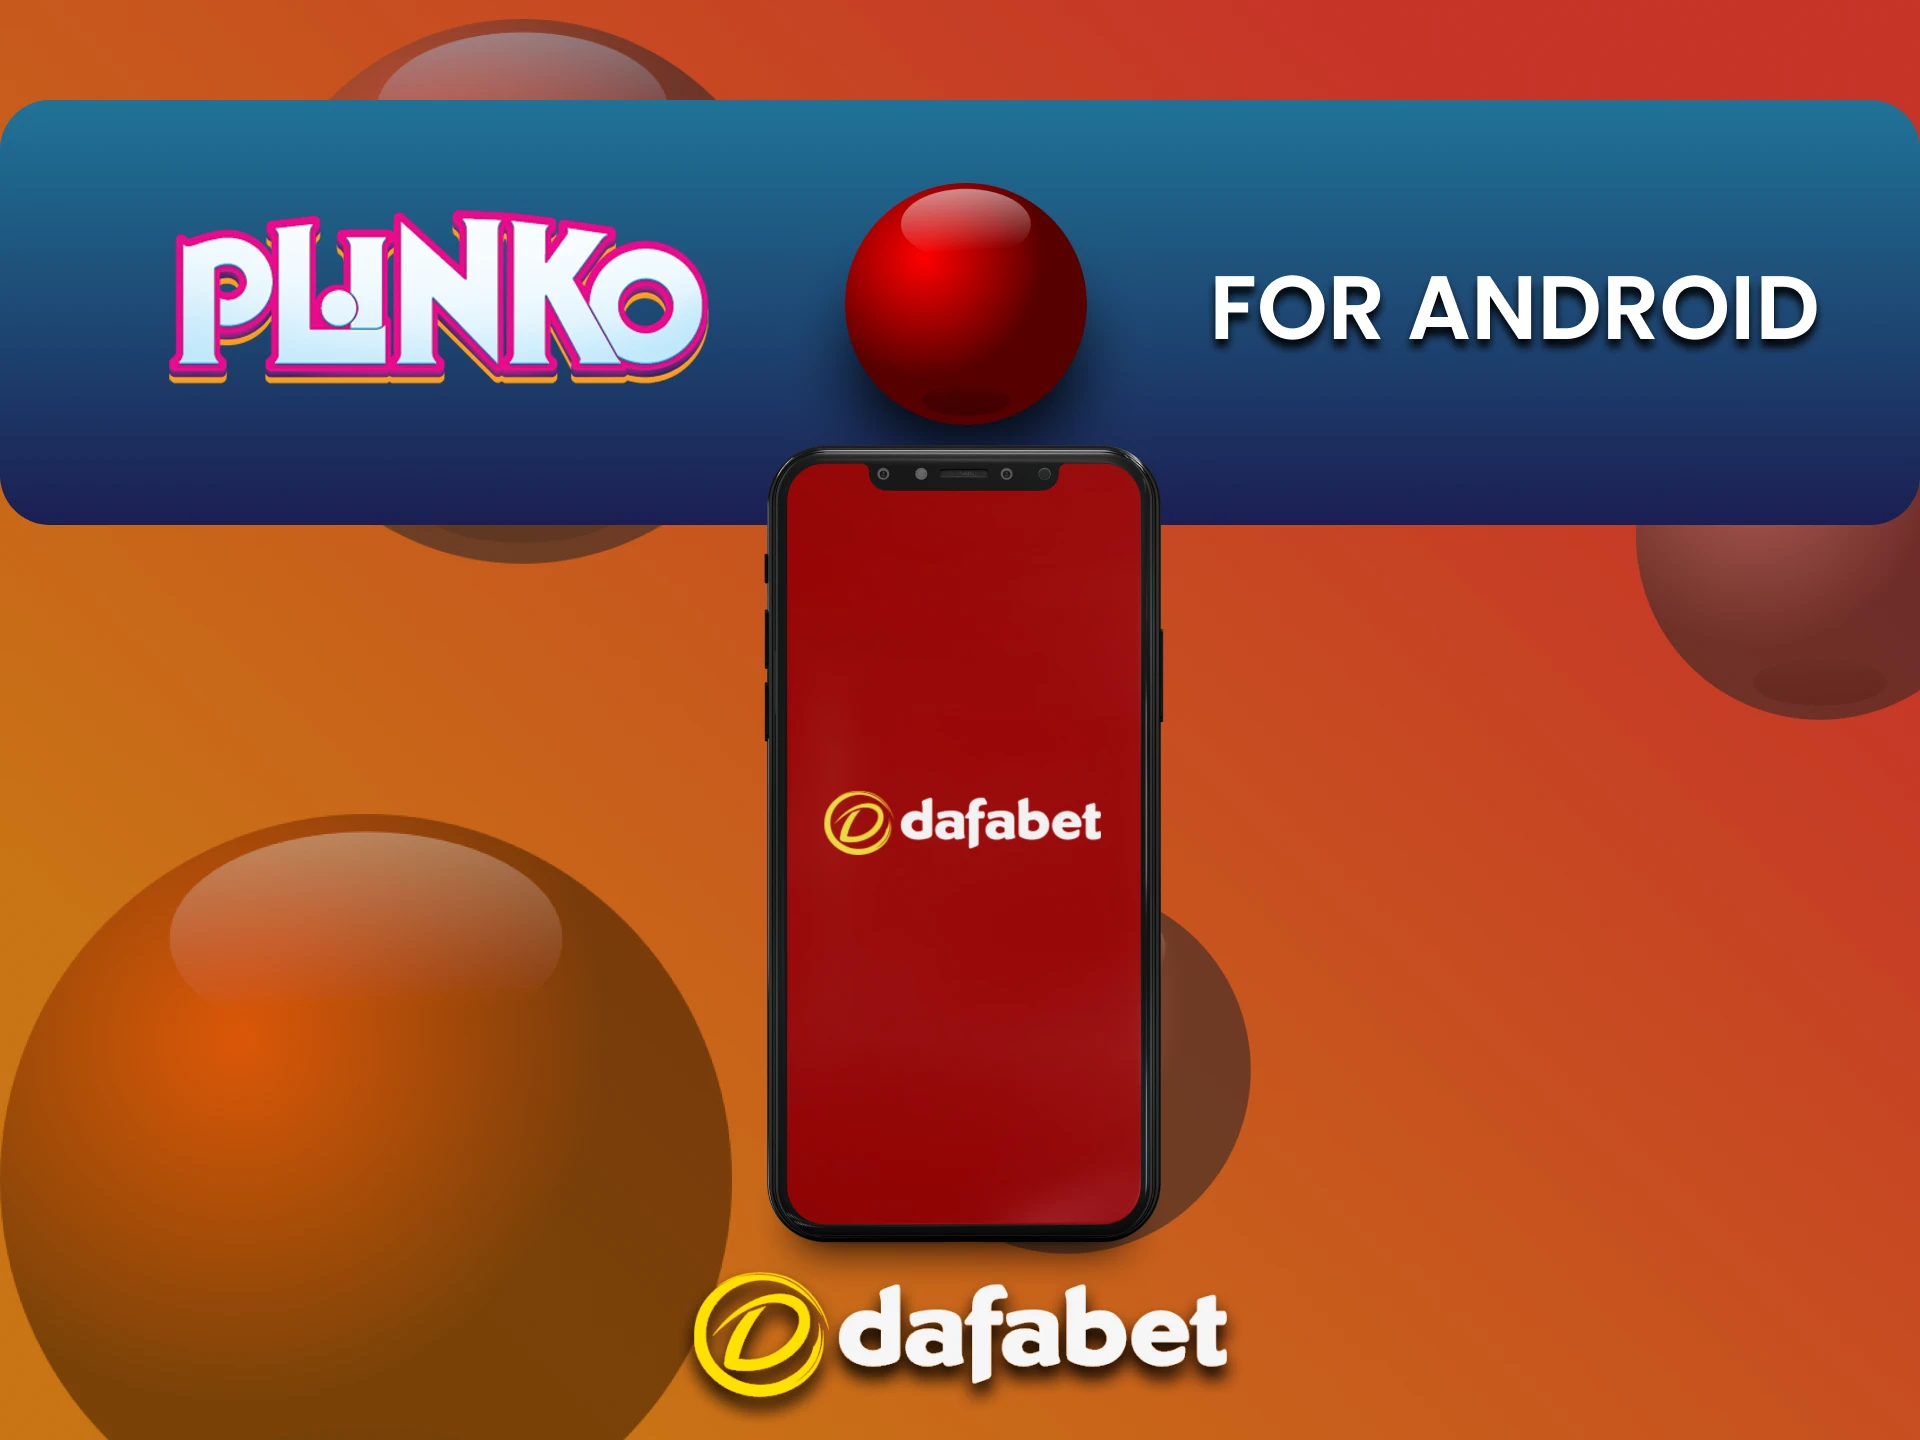 Download the Dafabet app to play Plinko on Android.